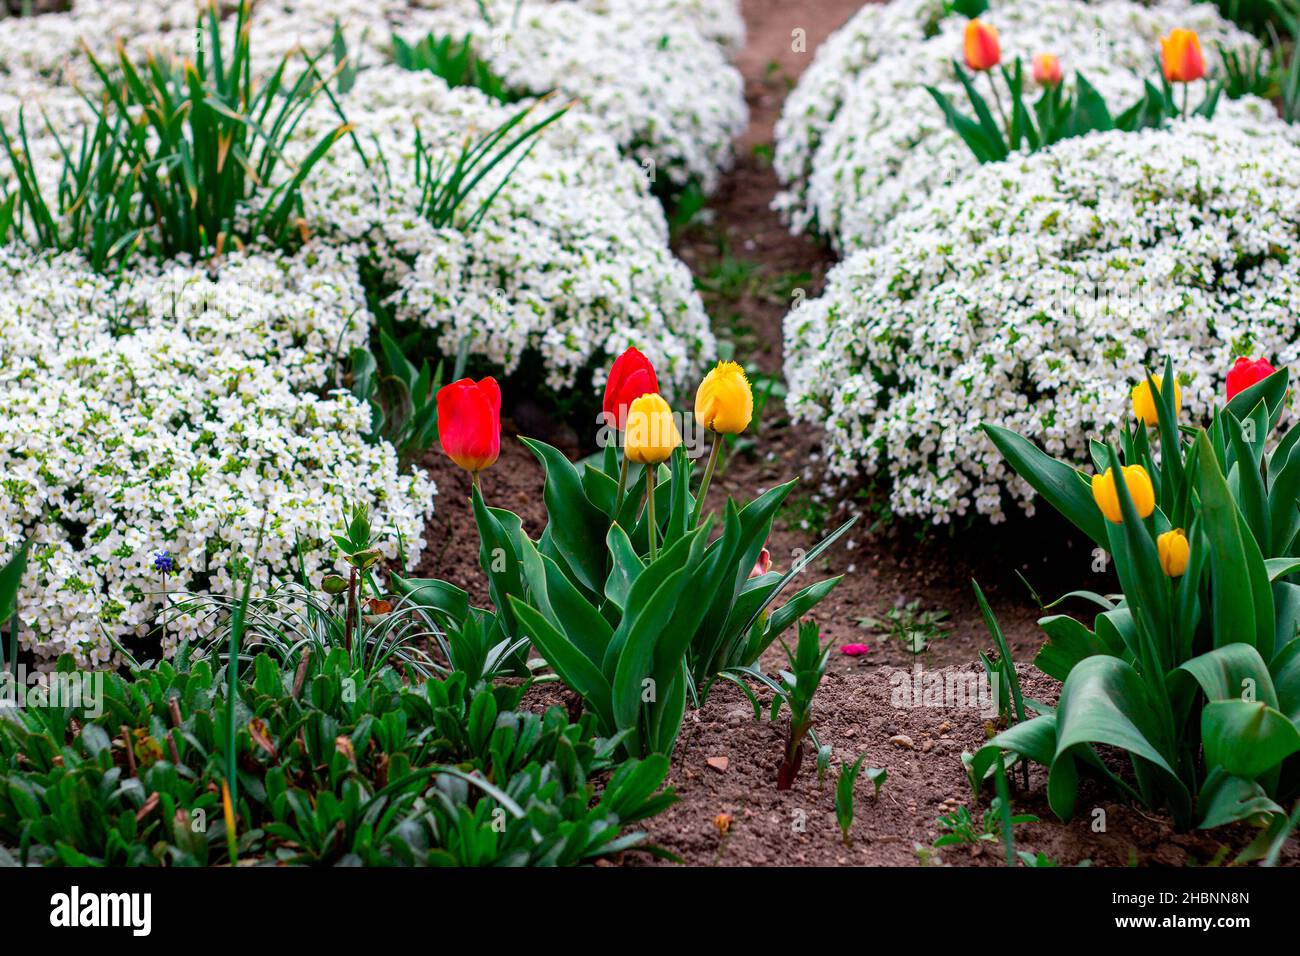 Bright colorful Tulips and Arabis caucasica flowers flowerbed with green leaves blossoms in the garden in spring and summer season. Stock Photo